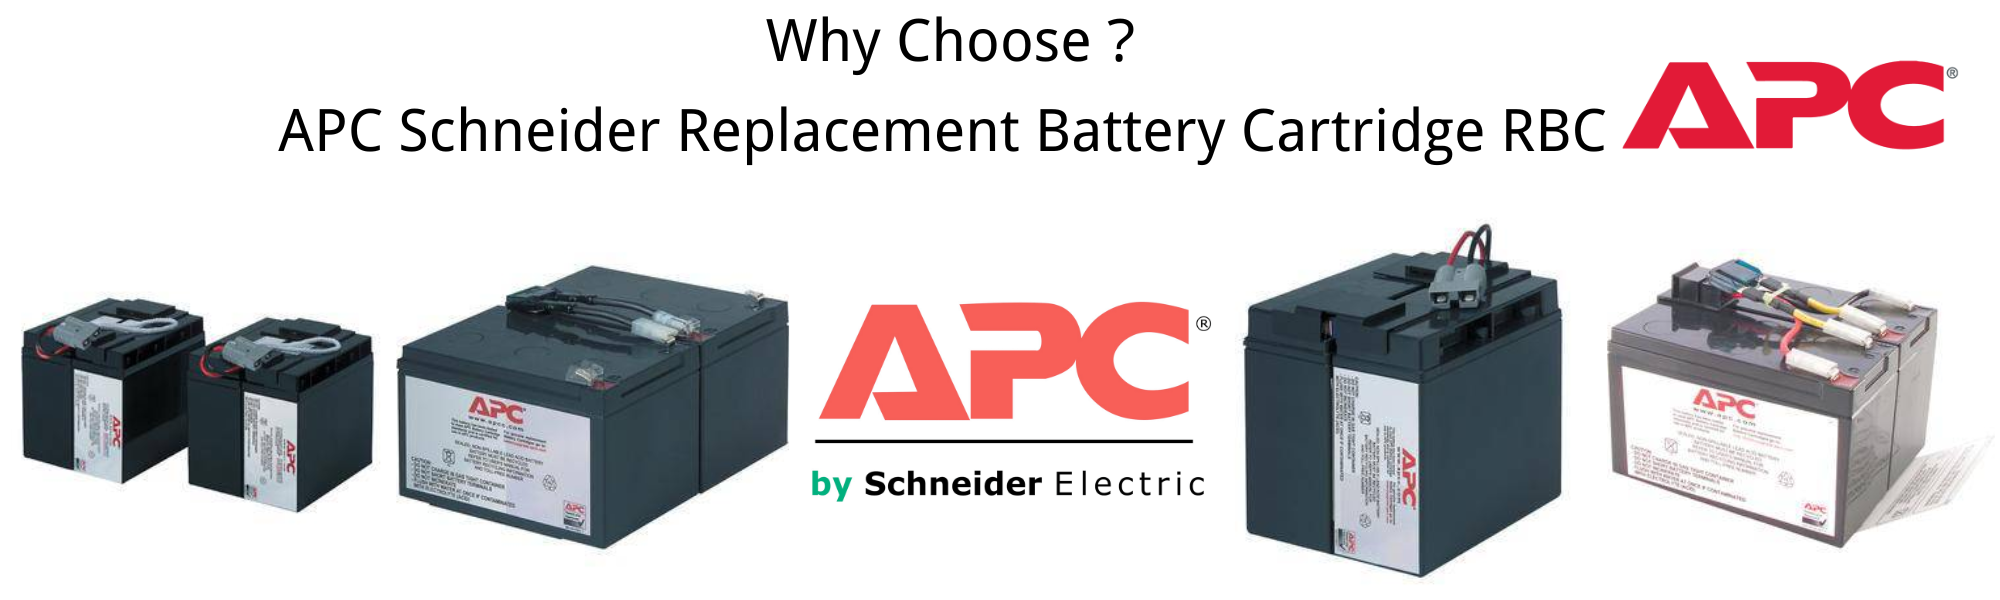 APC Schneider Replacement Battery Cartridge RBC: Your Ultimate Power Solution